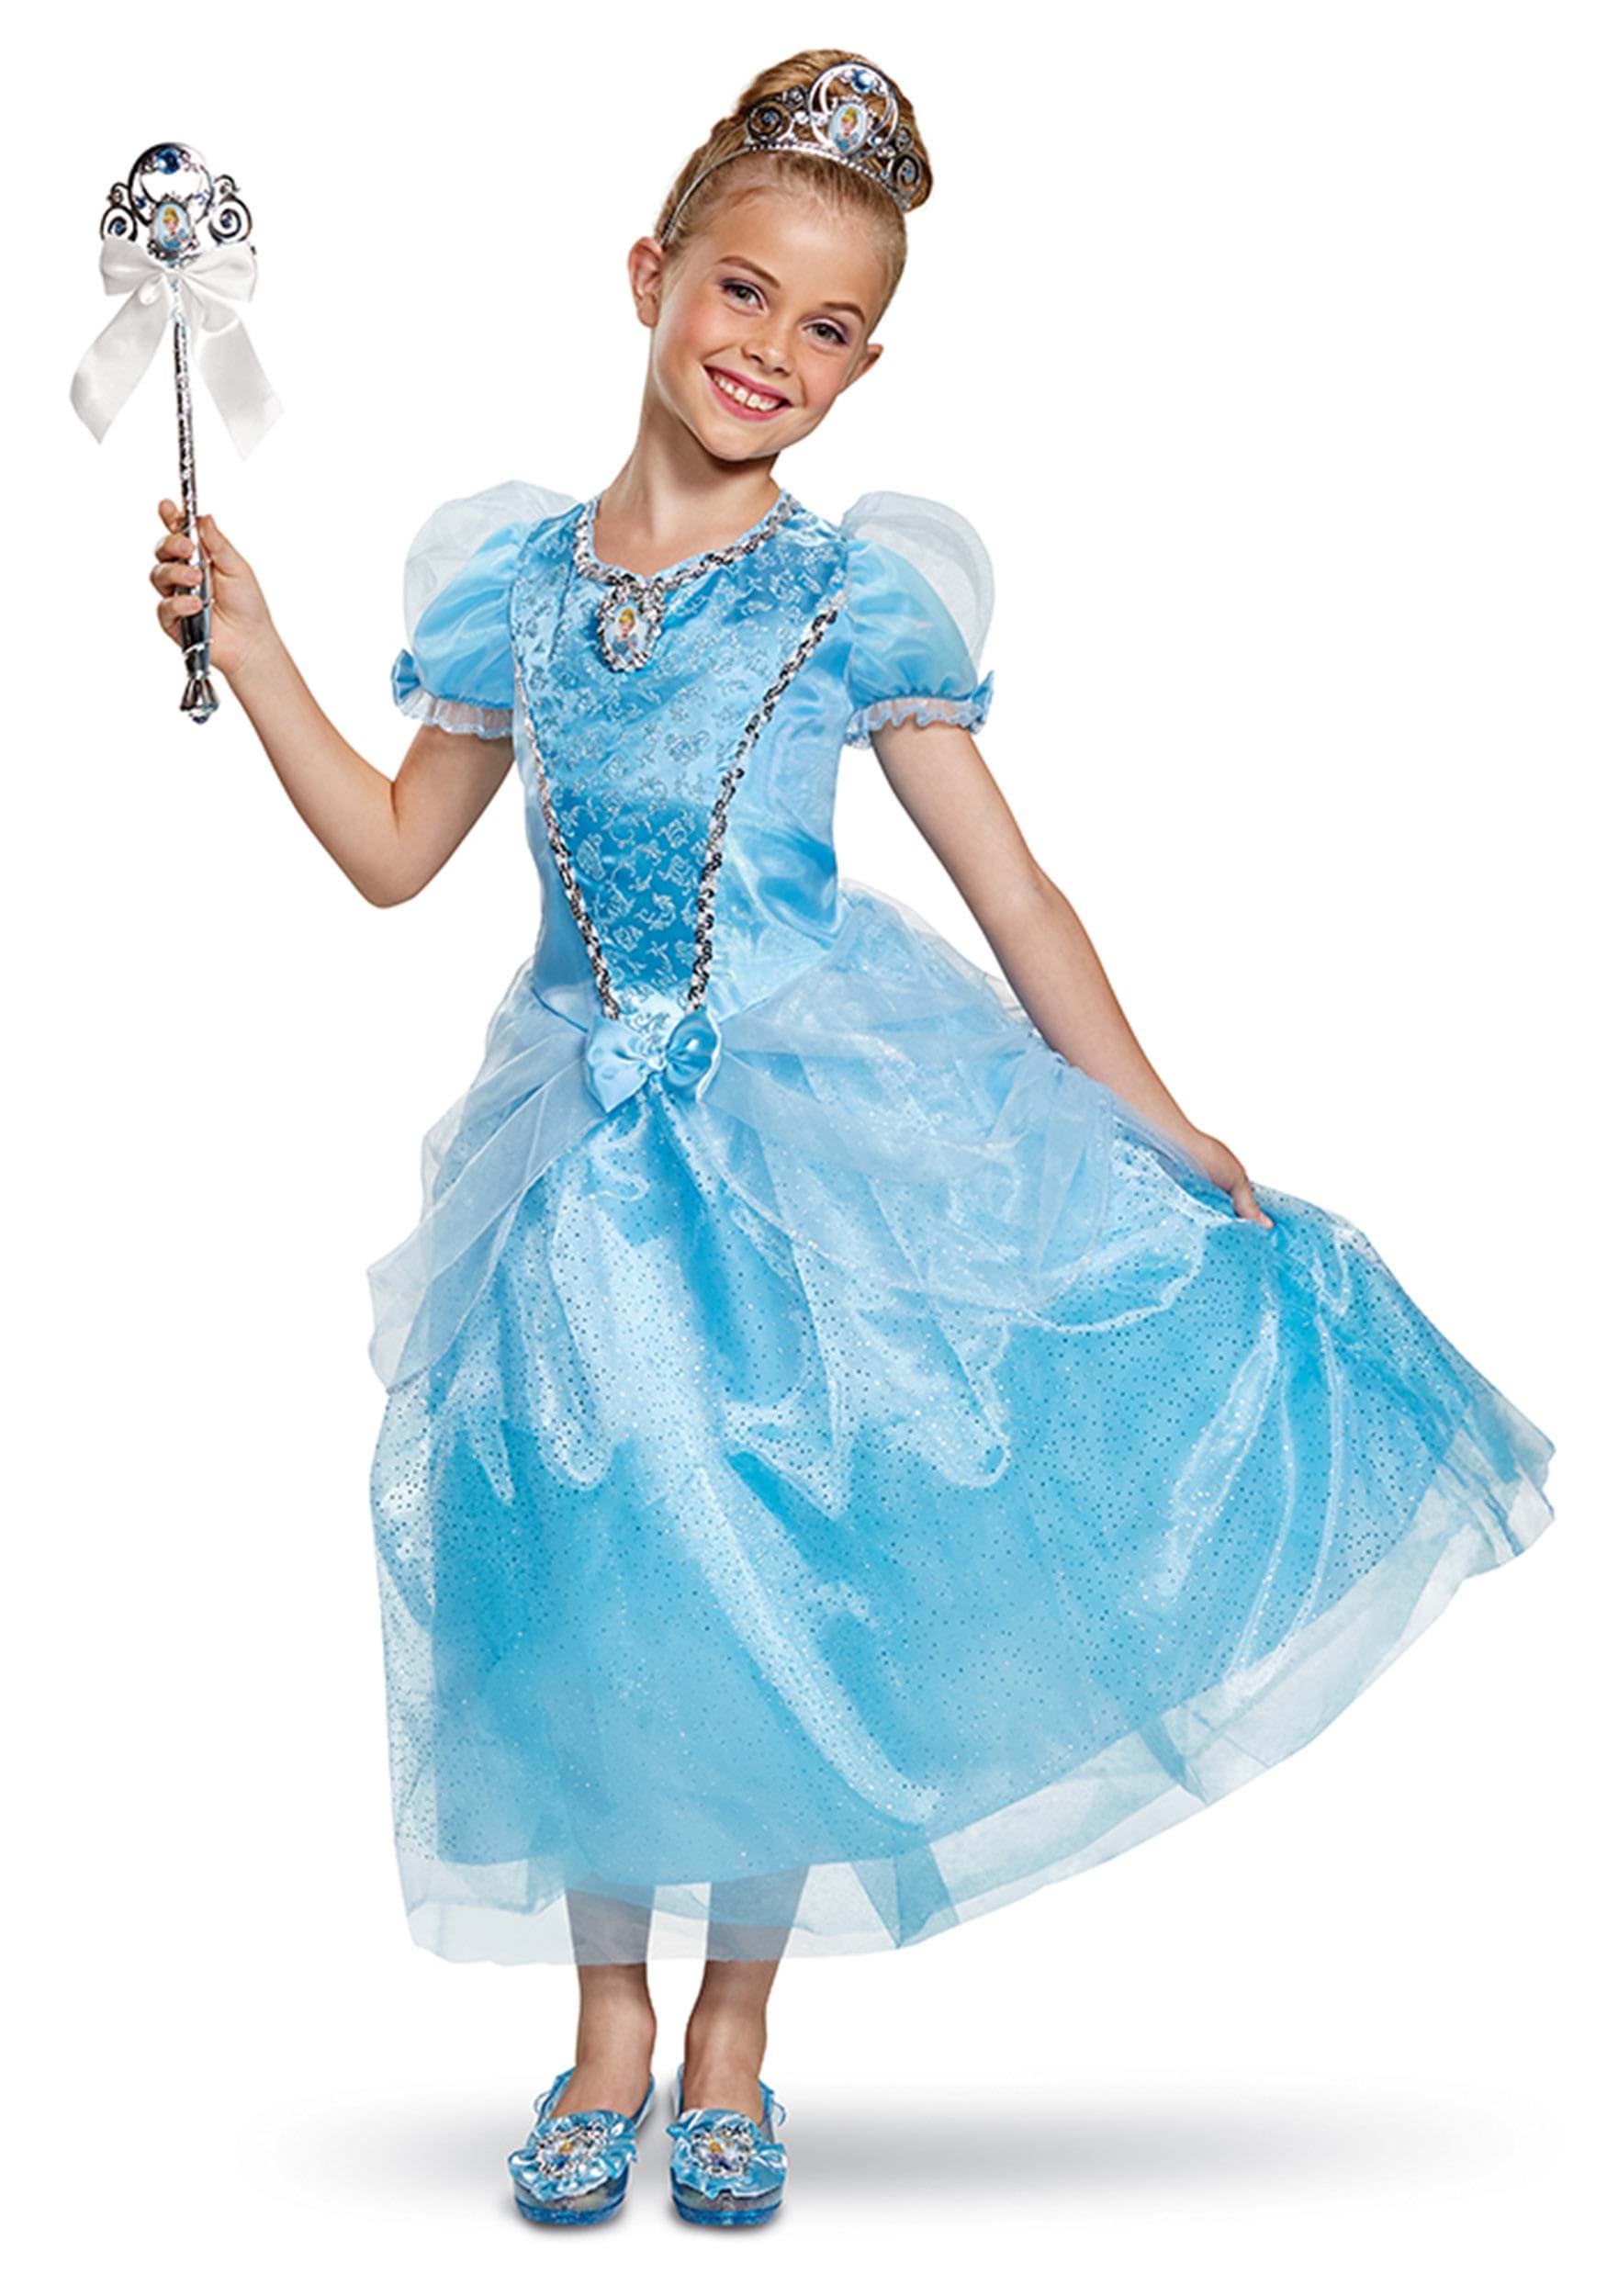 Photos - Fancy Dress Disguise Kid's Cinderella Deluxe Costume Blue/Gray DI67013